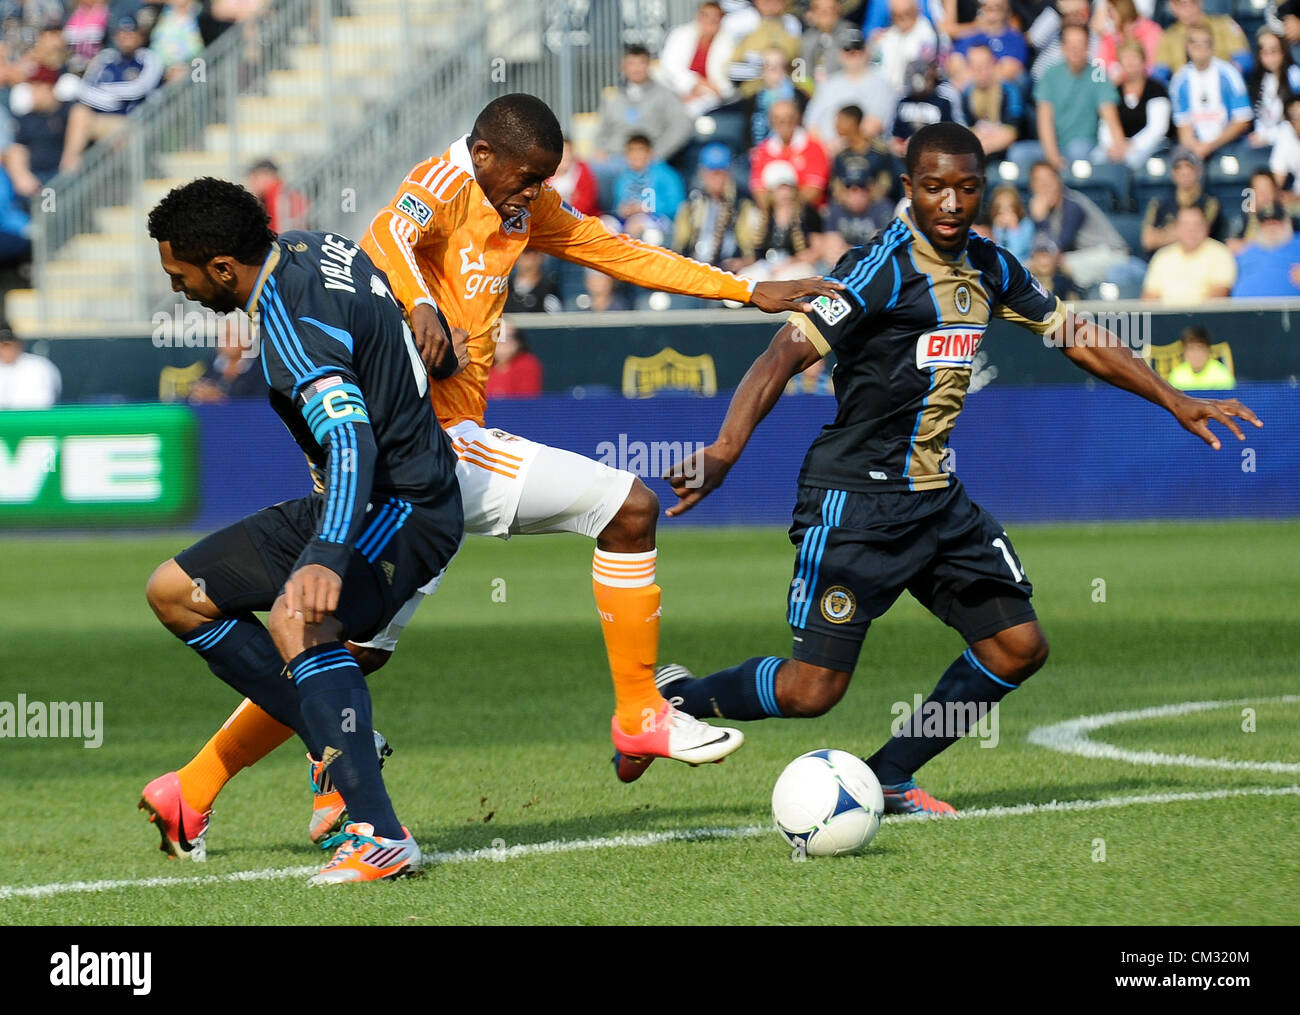 Sept. 23, 2012 - Chester, Pennsylvania, U.S - Union's,  CARLOS VALDES and MICHAEL LAHOUD, in action against Houston. The Union won the match 3-1 at PPL Park (Credit Image: © Ricky Fitchett/ZUMAPRESS.com) Stock Photo